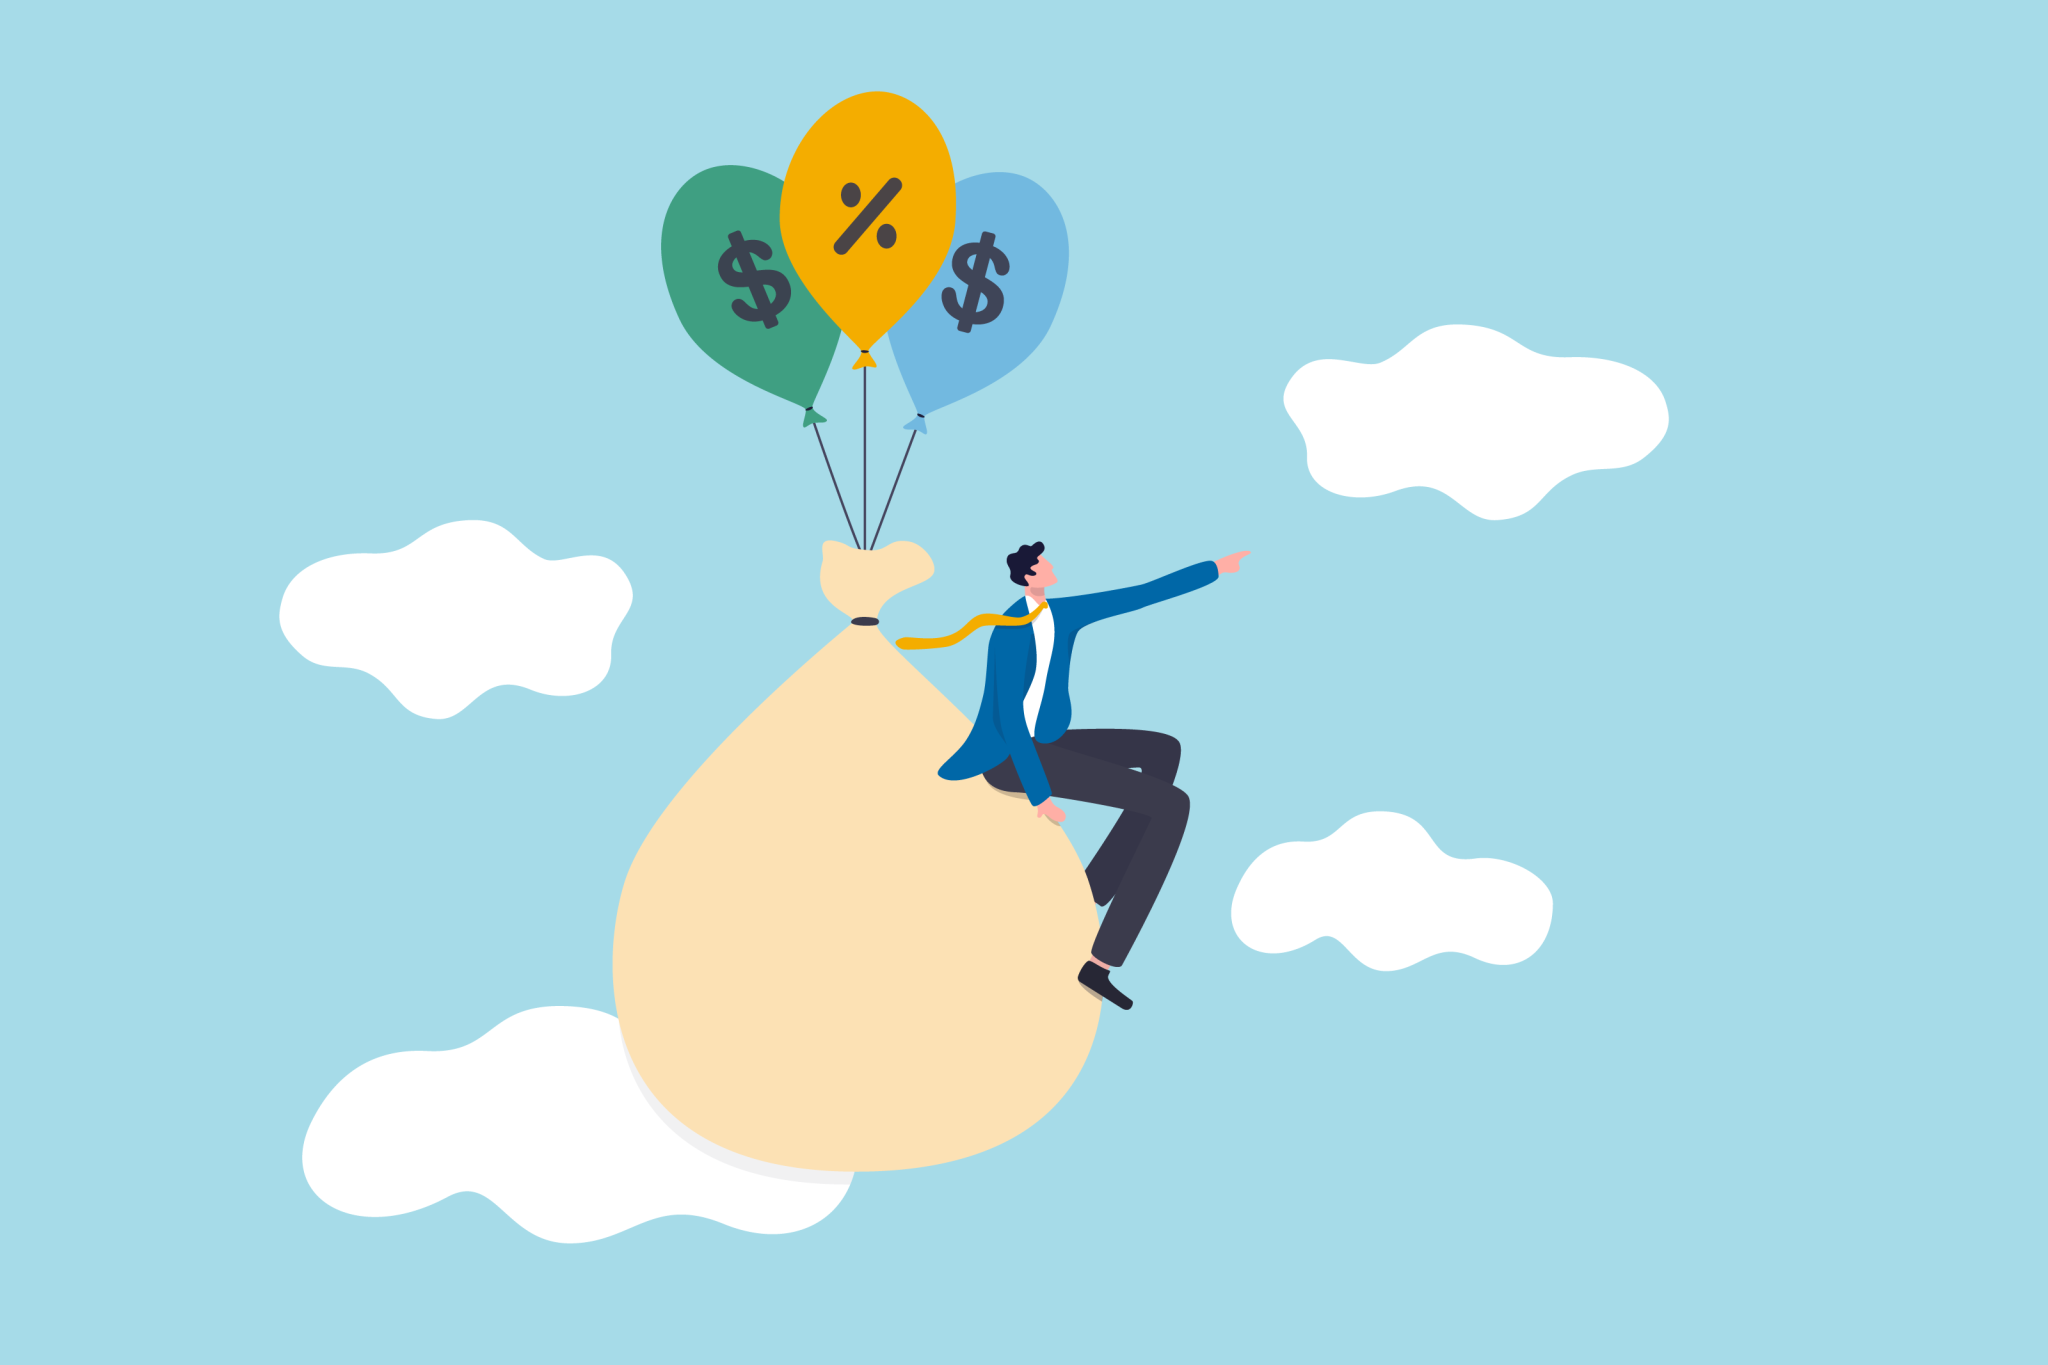 graphic of a businessperson on bag of balloons with dollar & division symbols flying across a blue sky